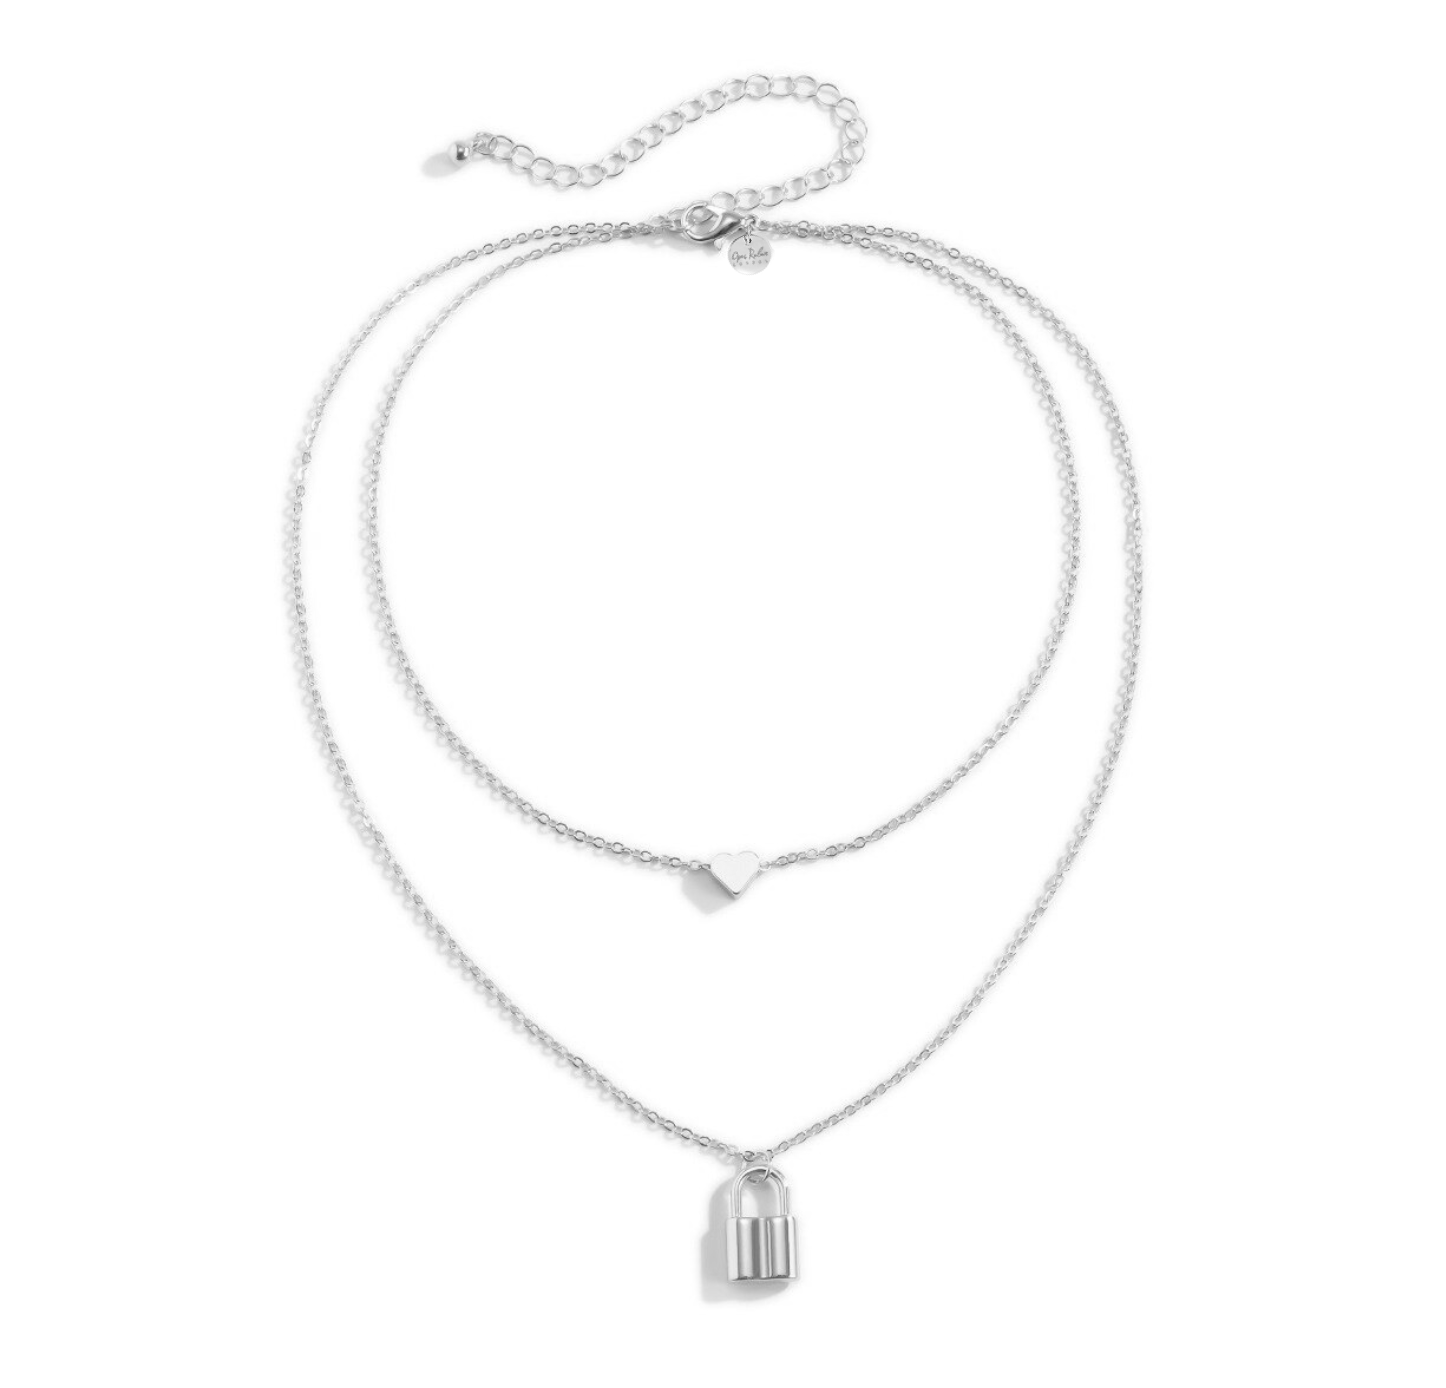 Opes Robur SILVER DOUBLE LAYER HEART CHAIN